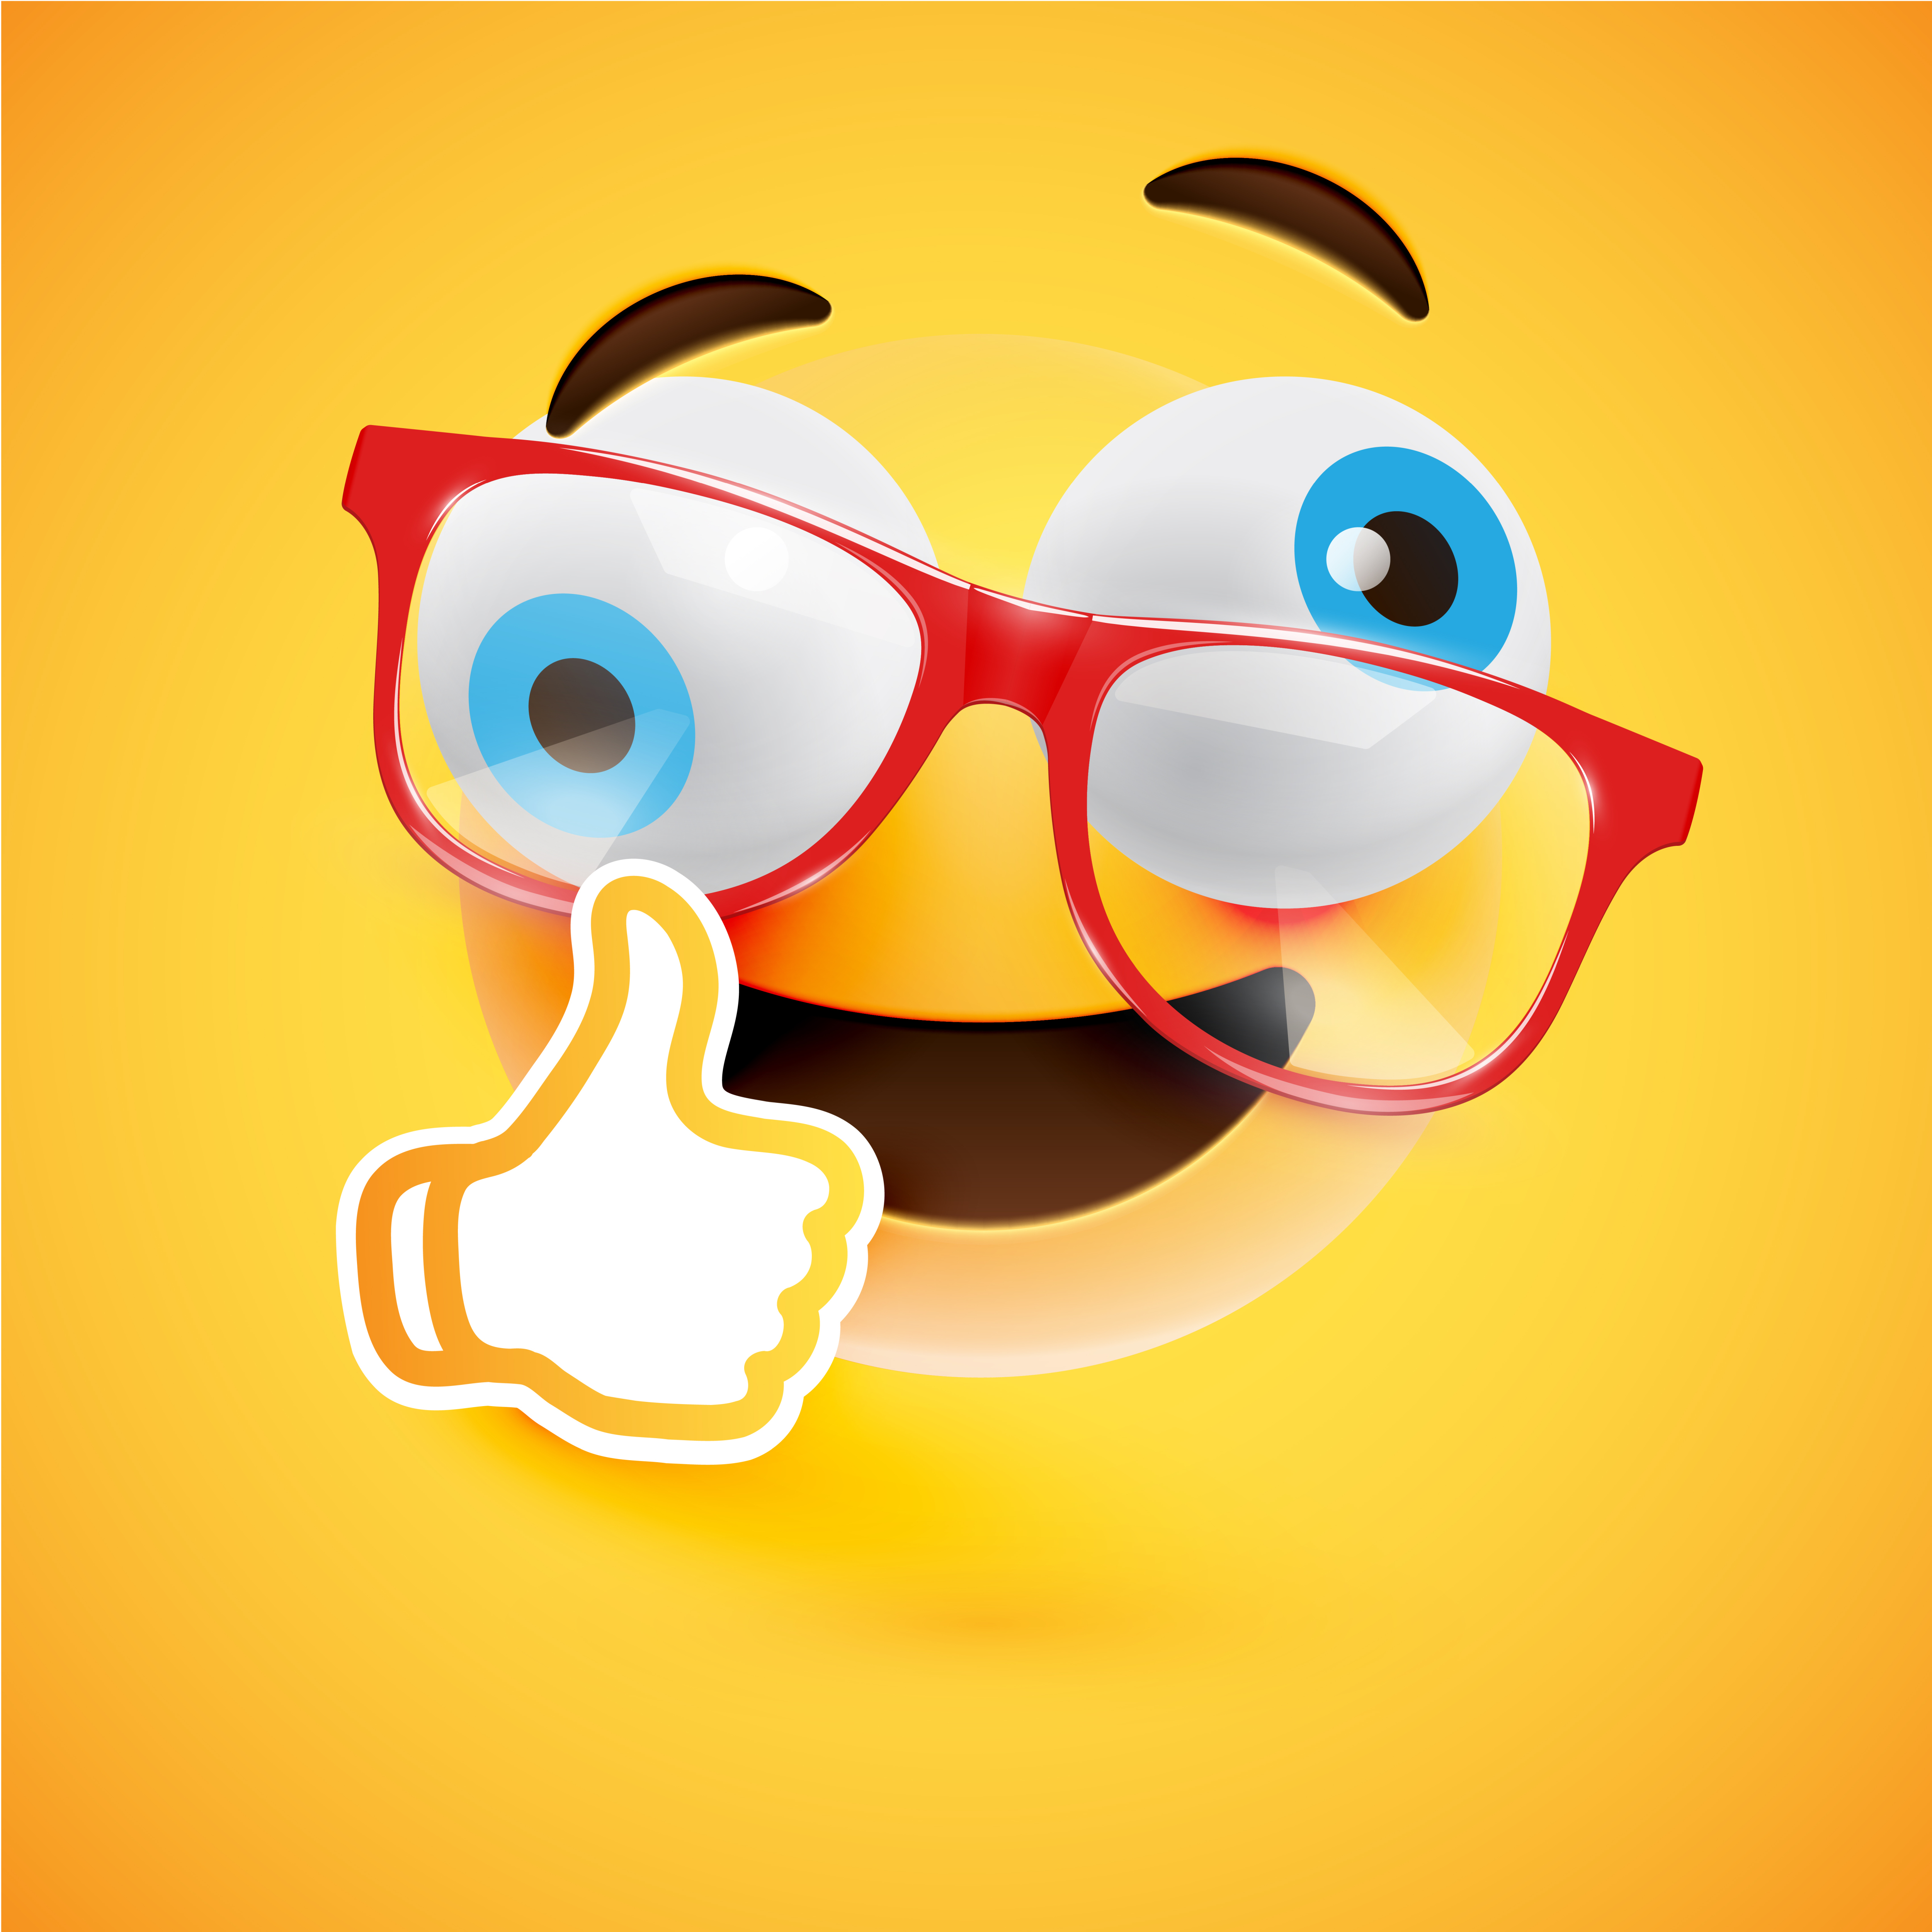 Cute Emoticon With Thumbs Up Emoji Illustration Cartoon Vector Images ...